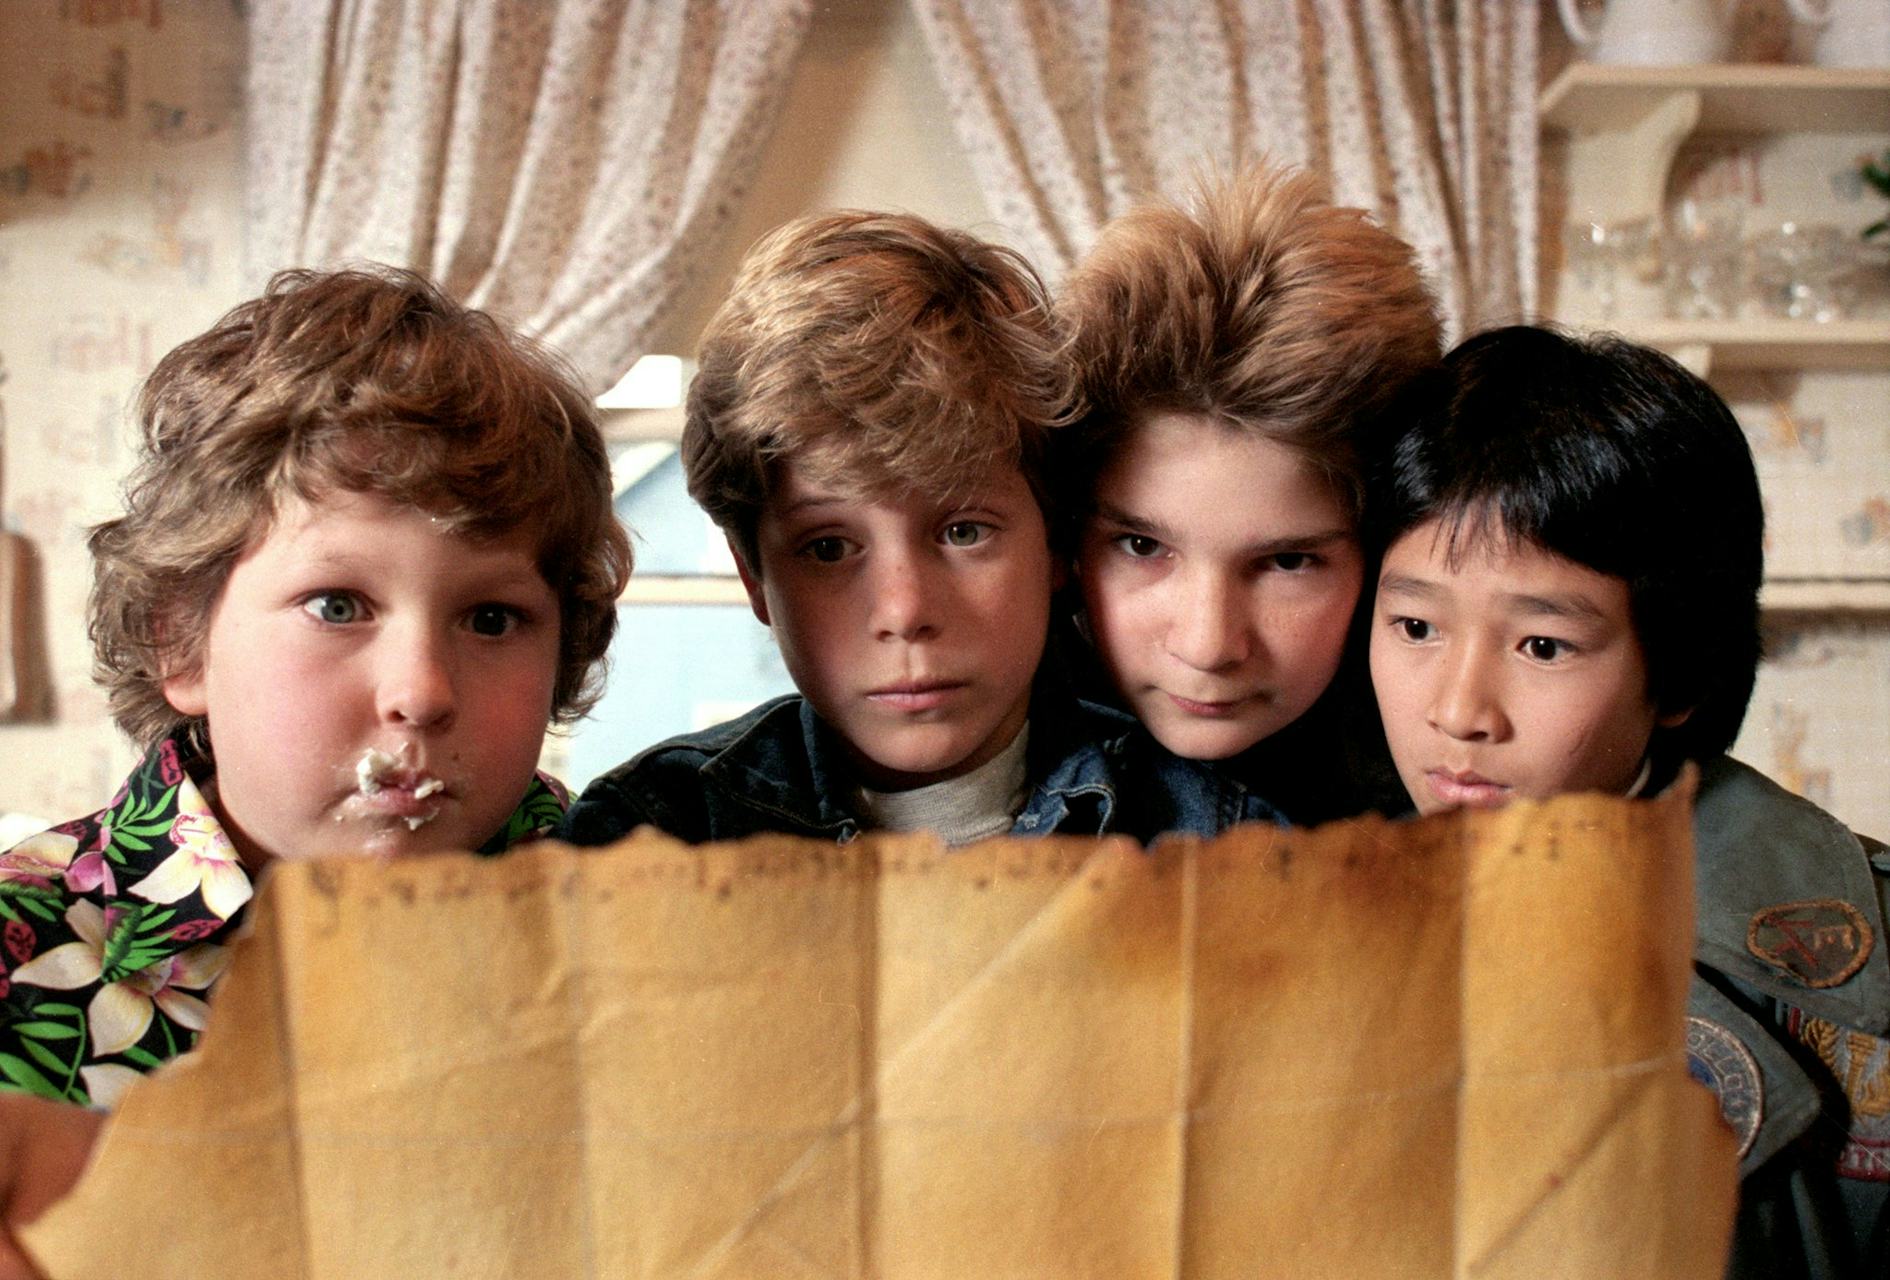 'The Goonies' to Immersive Theater Experience = Awesome